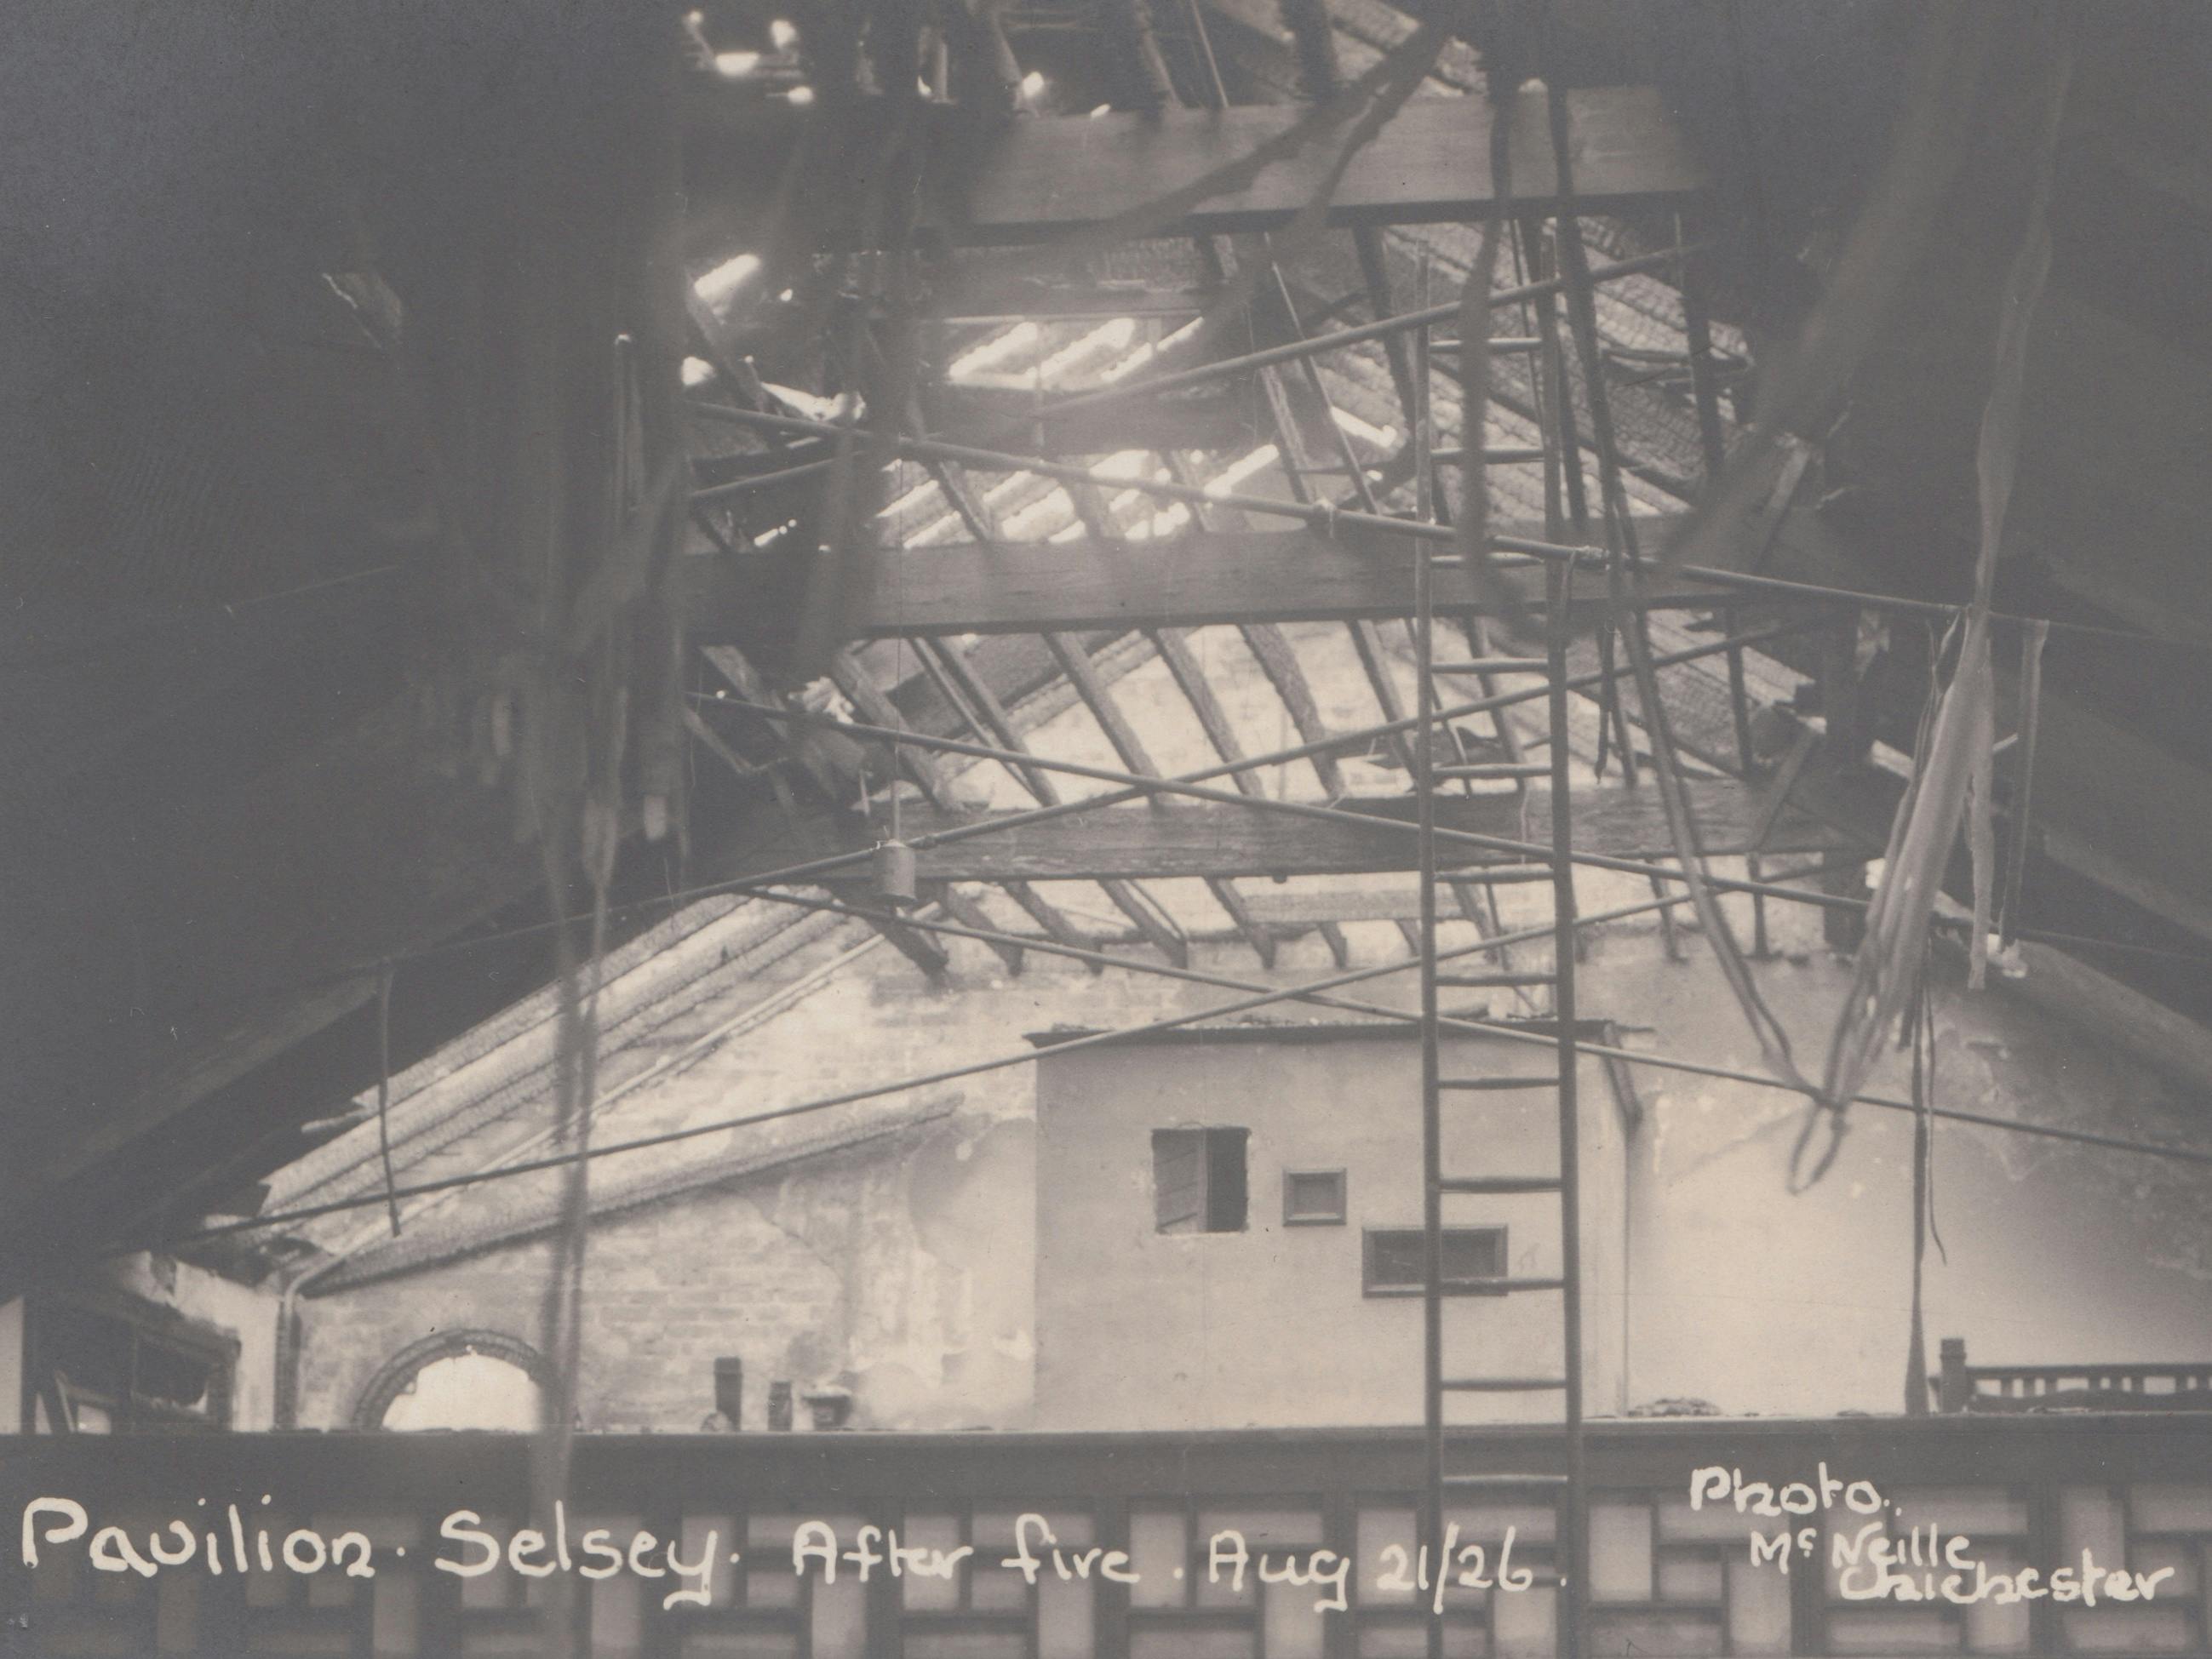 Image of the burnt out Pavilion following the fire in 1926 which includes the burnt out roof and rafters